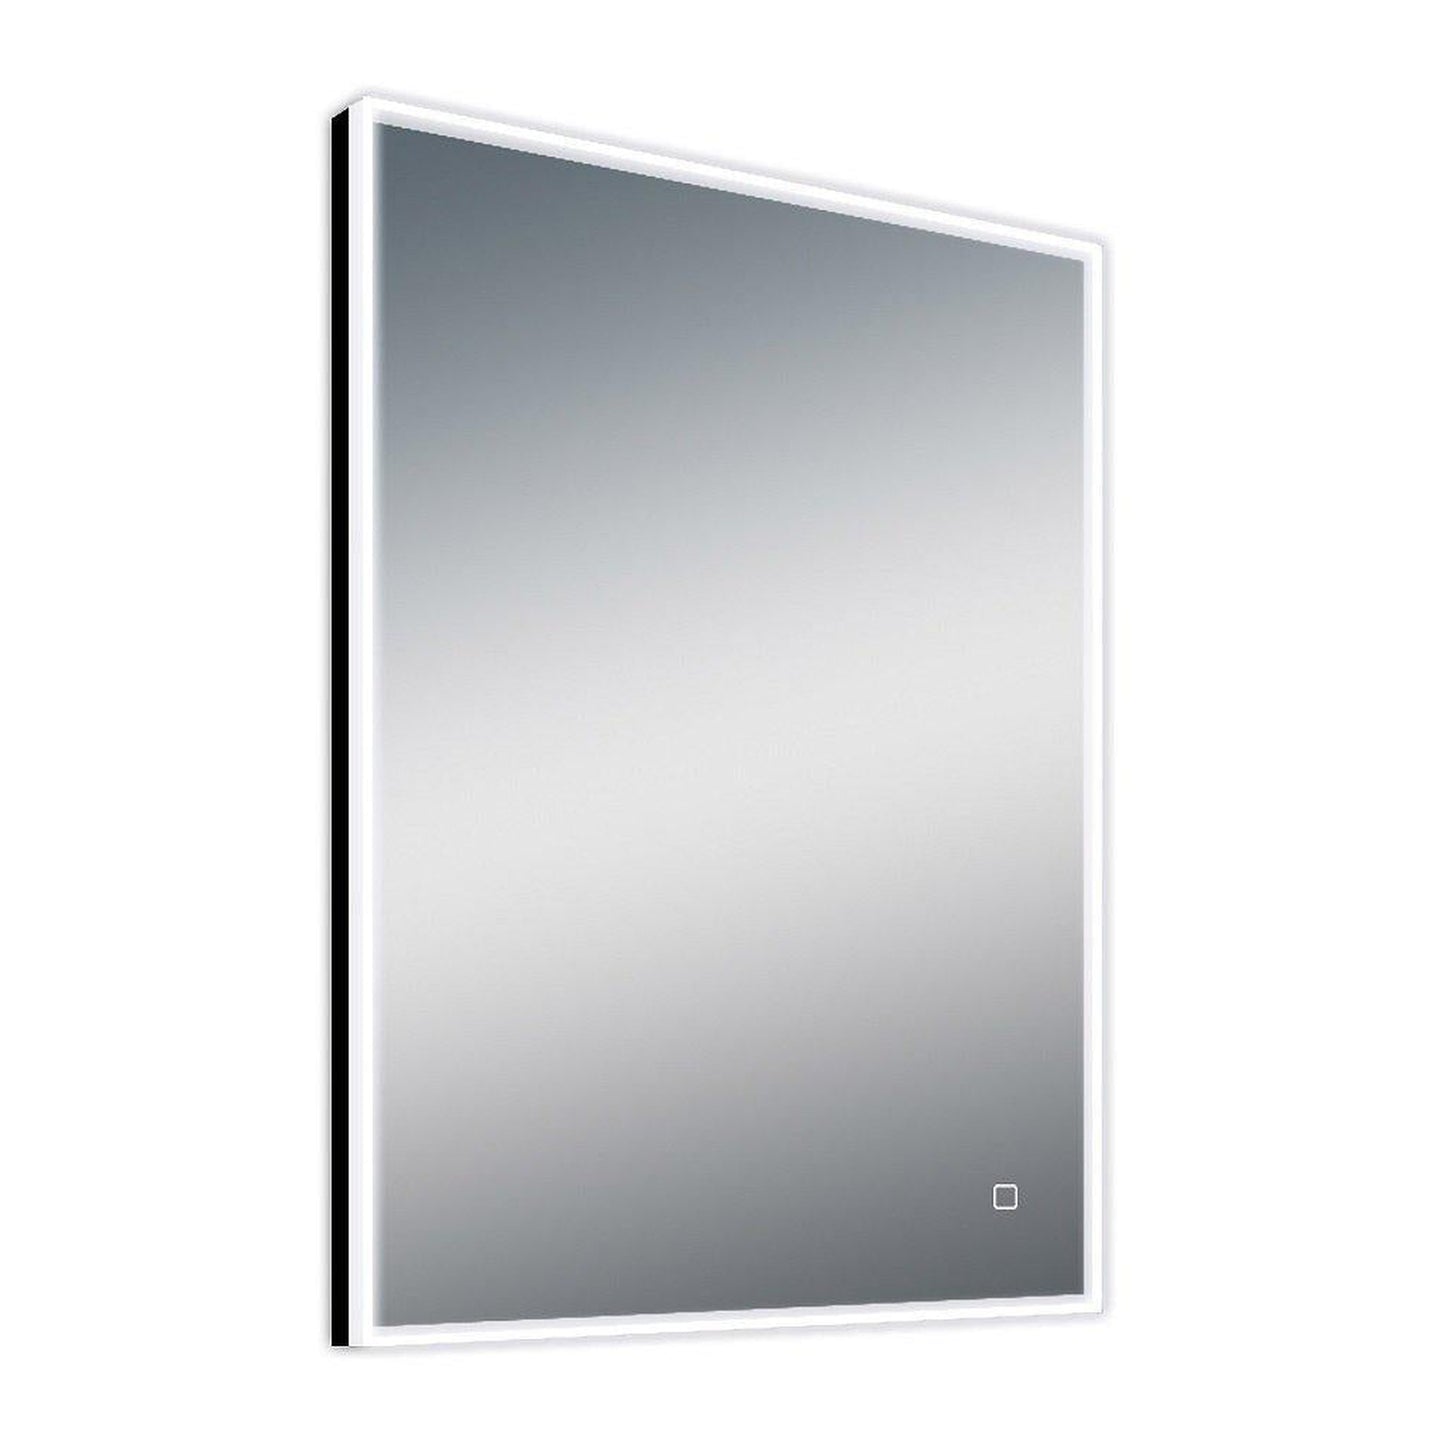 Lighted Impressions Beacon 30" x 36" Rectangular Framed Wall-Mounted LED Mirror With Dimmable Touch Sensor